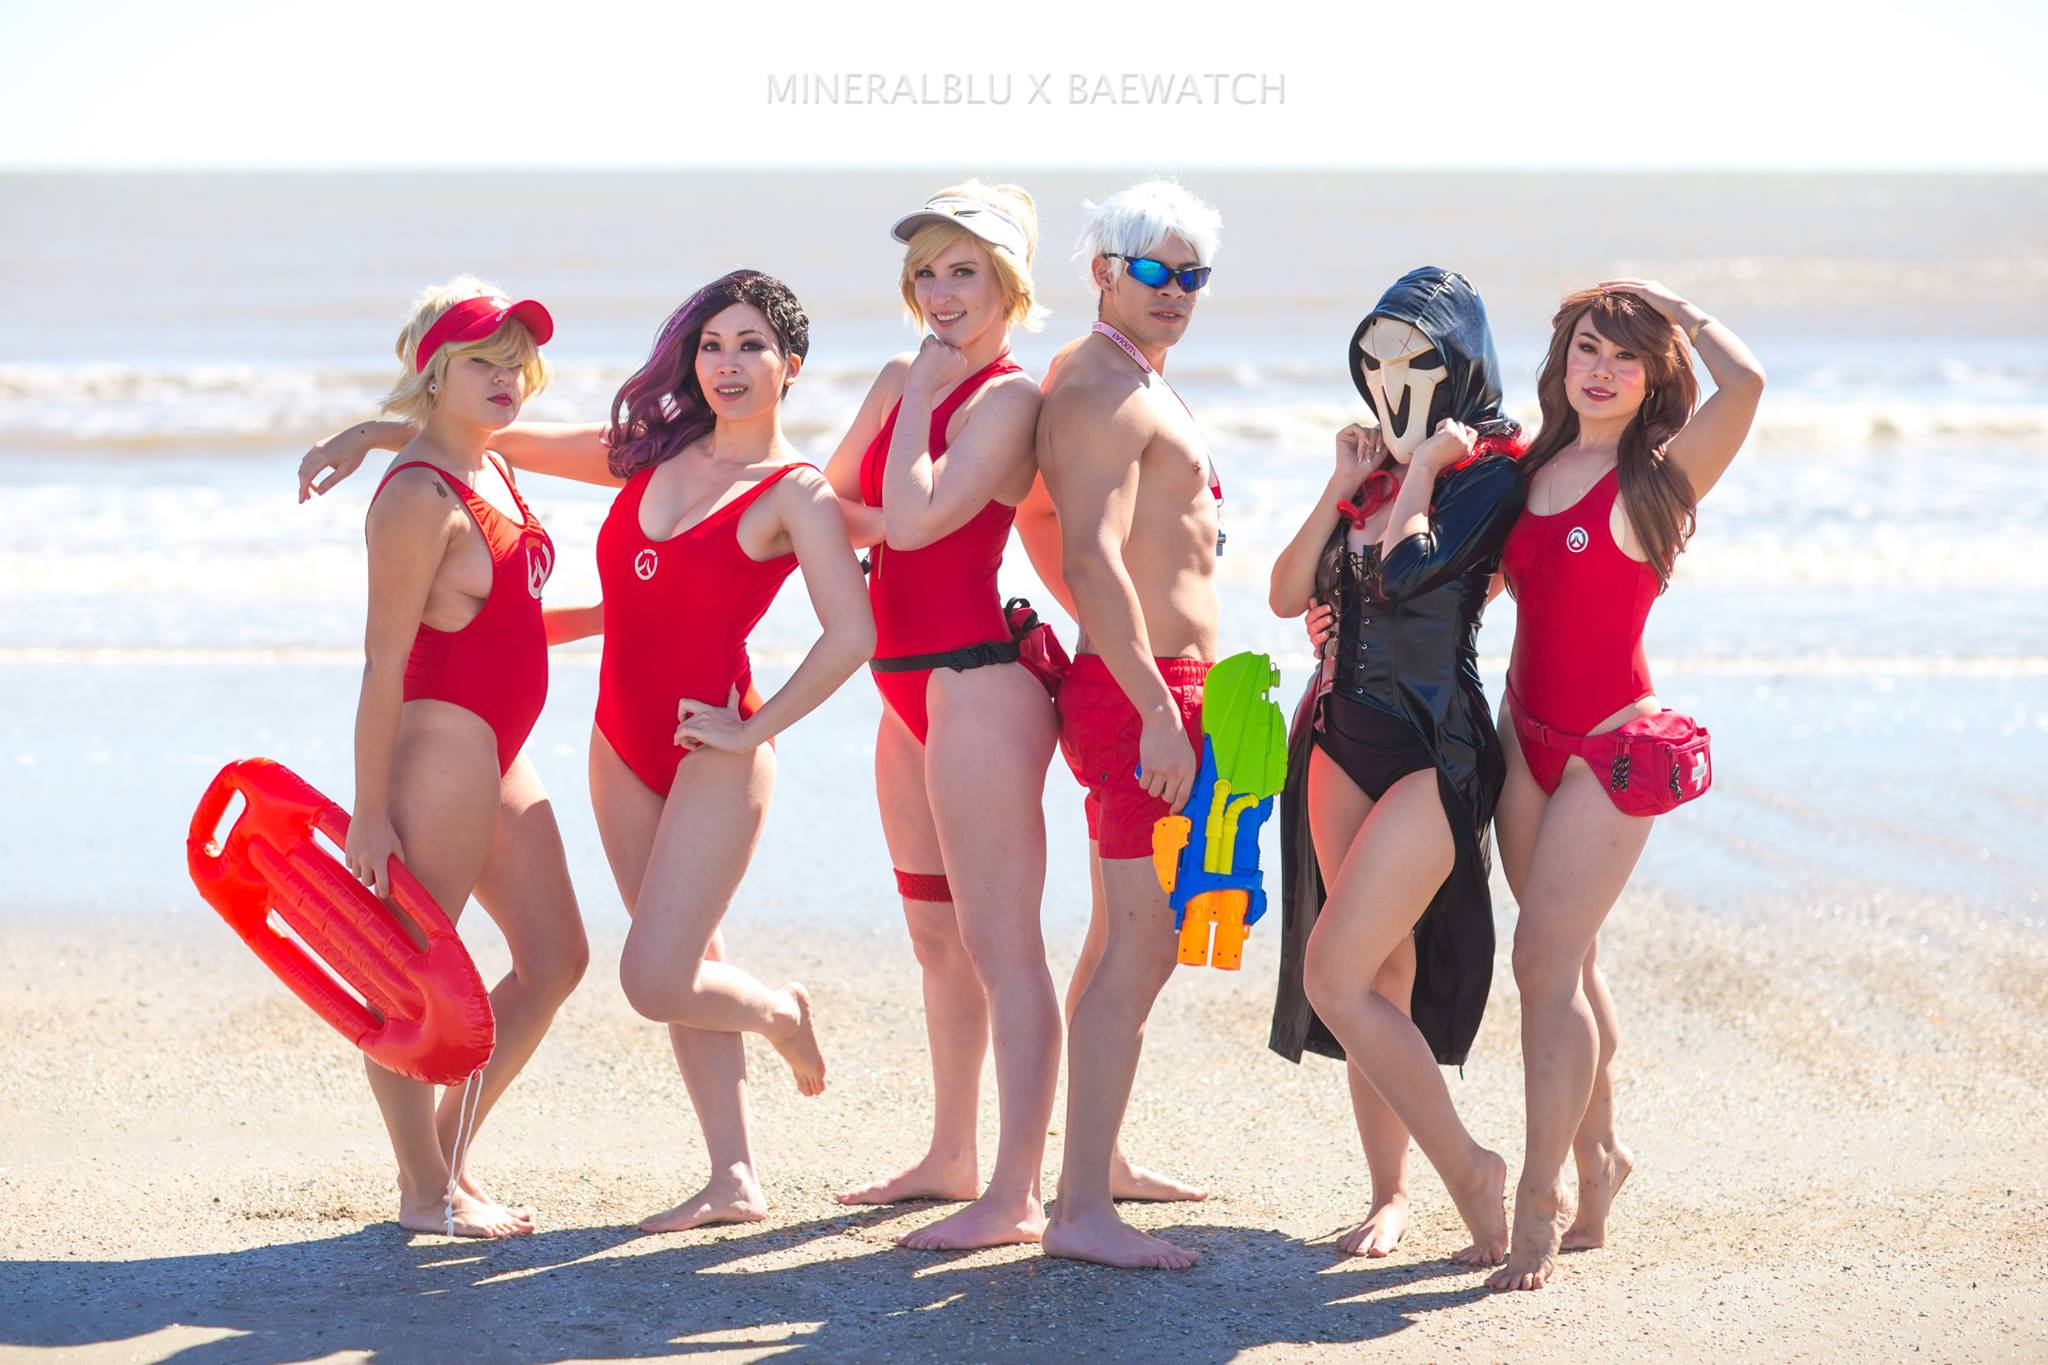 There’s A Cosplay Show Held At The Beach